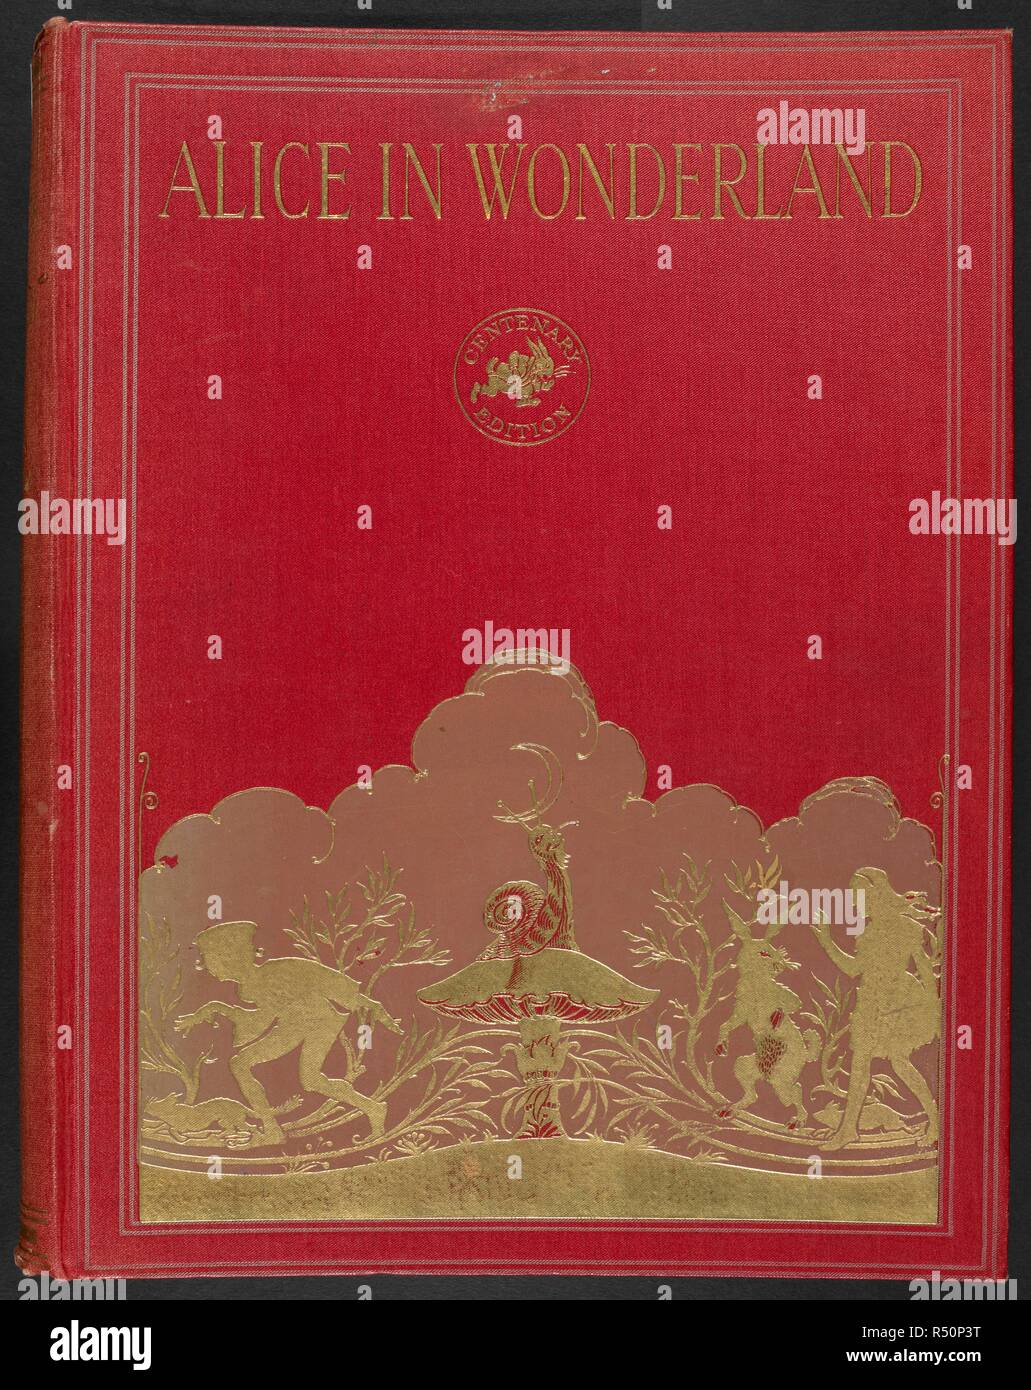 Red front cover with various characters embossed in gold. Alice's adventures in wonderland / by Lewis Carroll ; illustrated by Gwynedd M. Hudson. [London?] : Hodder and Stoughton, [1922?]. Source: YA.1997.b.4119 Front Cover. Stock Photo